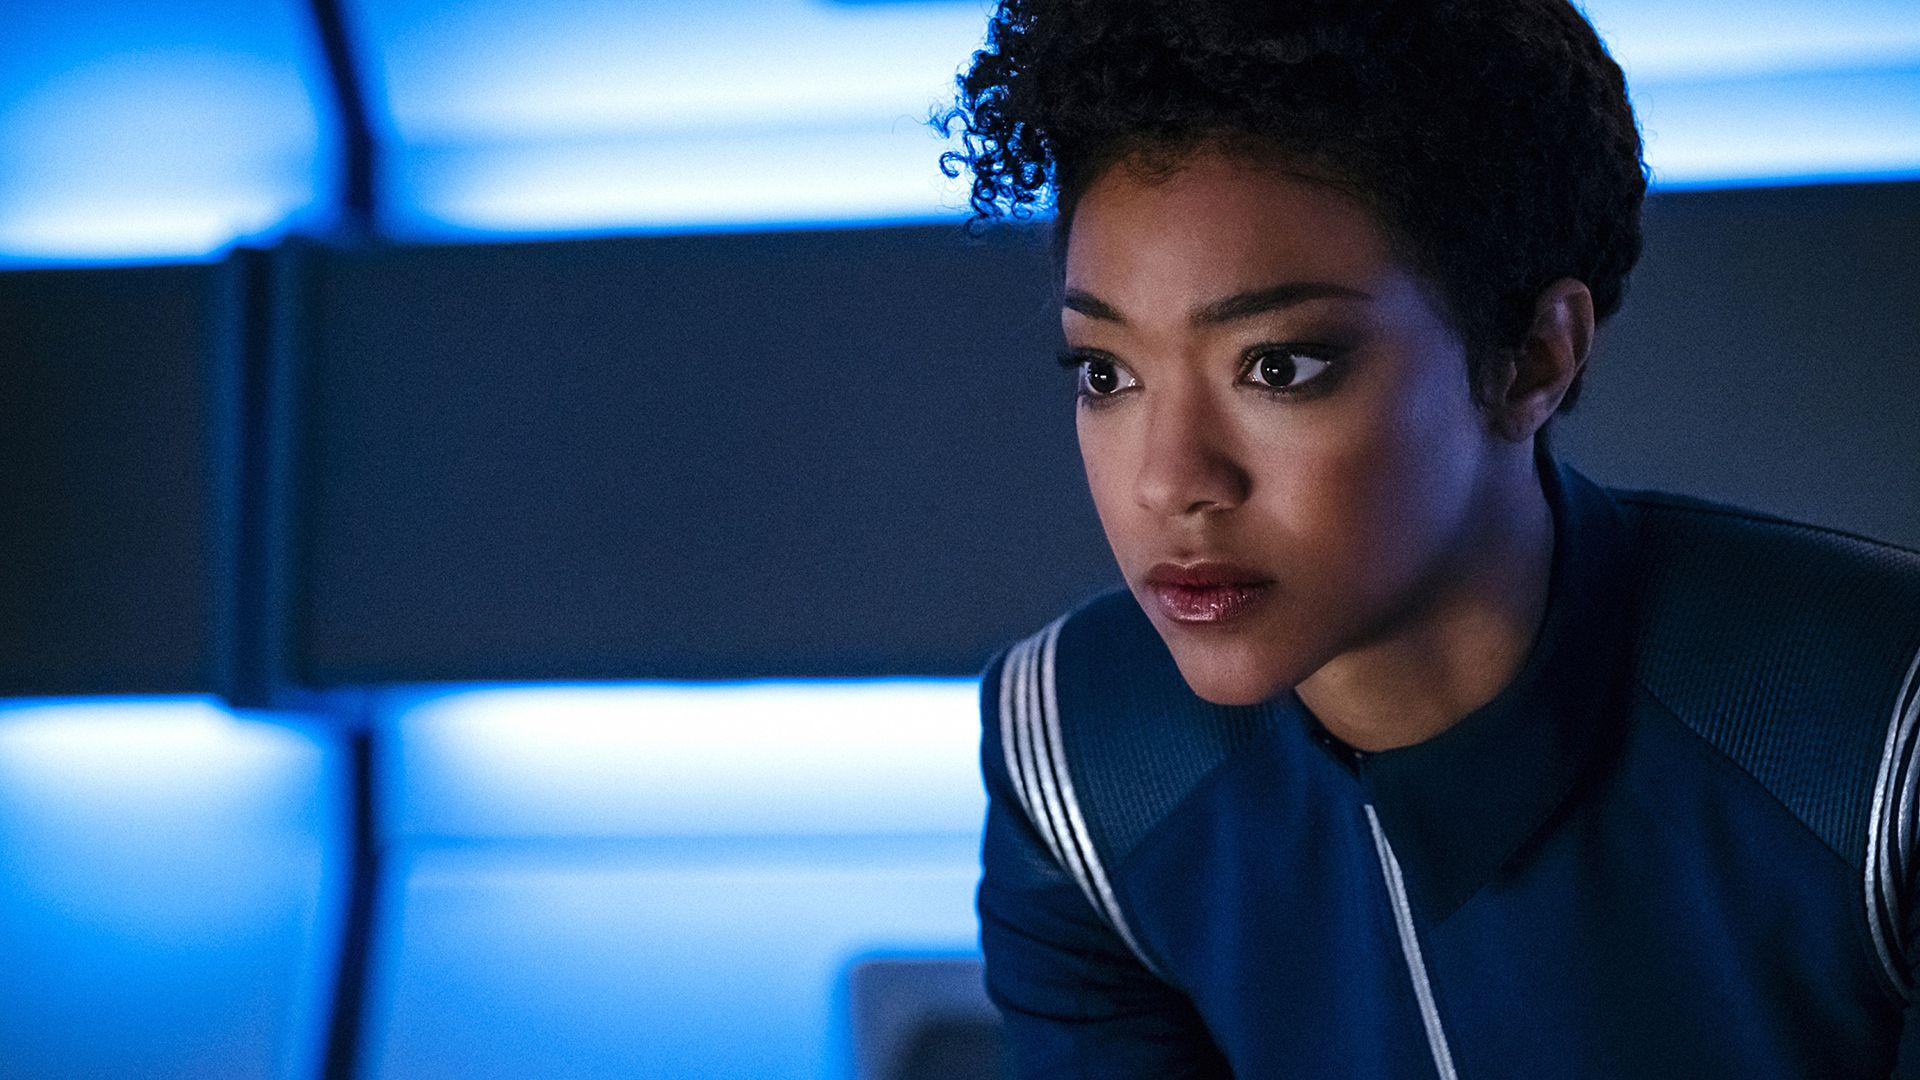 Check Out New Photo From Episode 5 Of Star Trek: Discovery